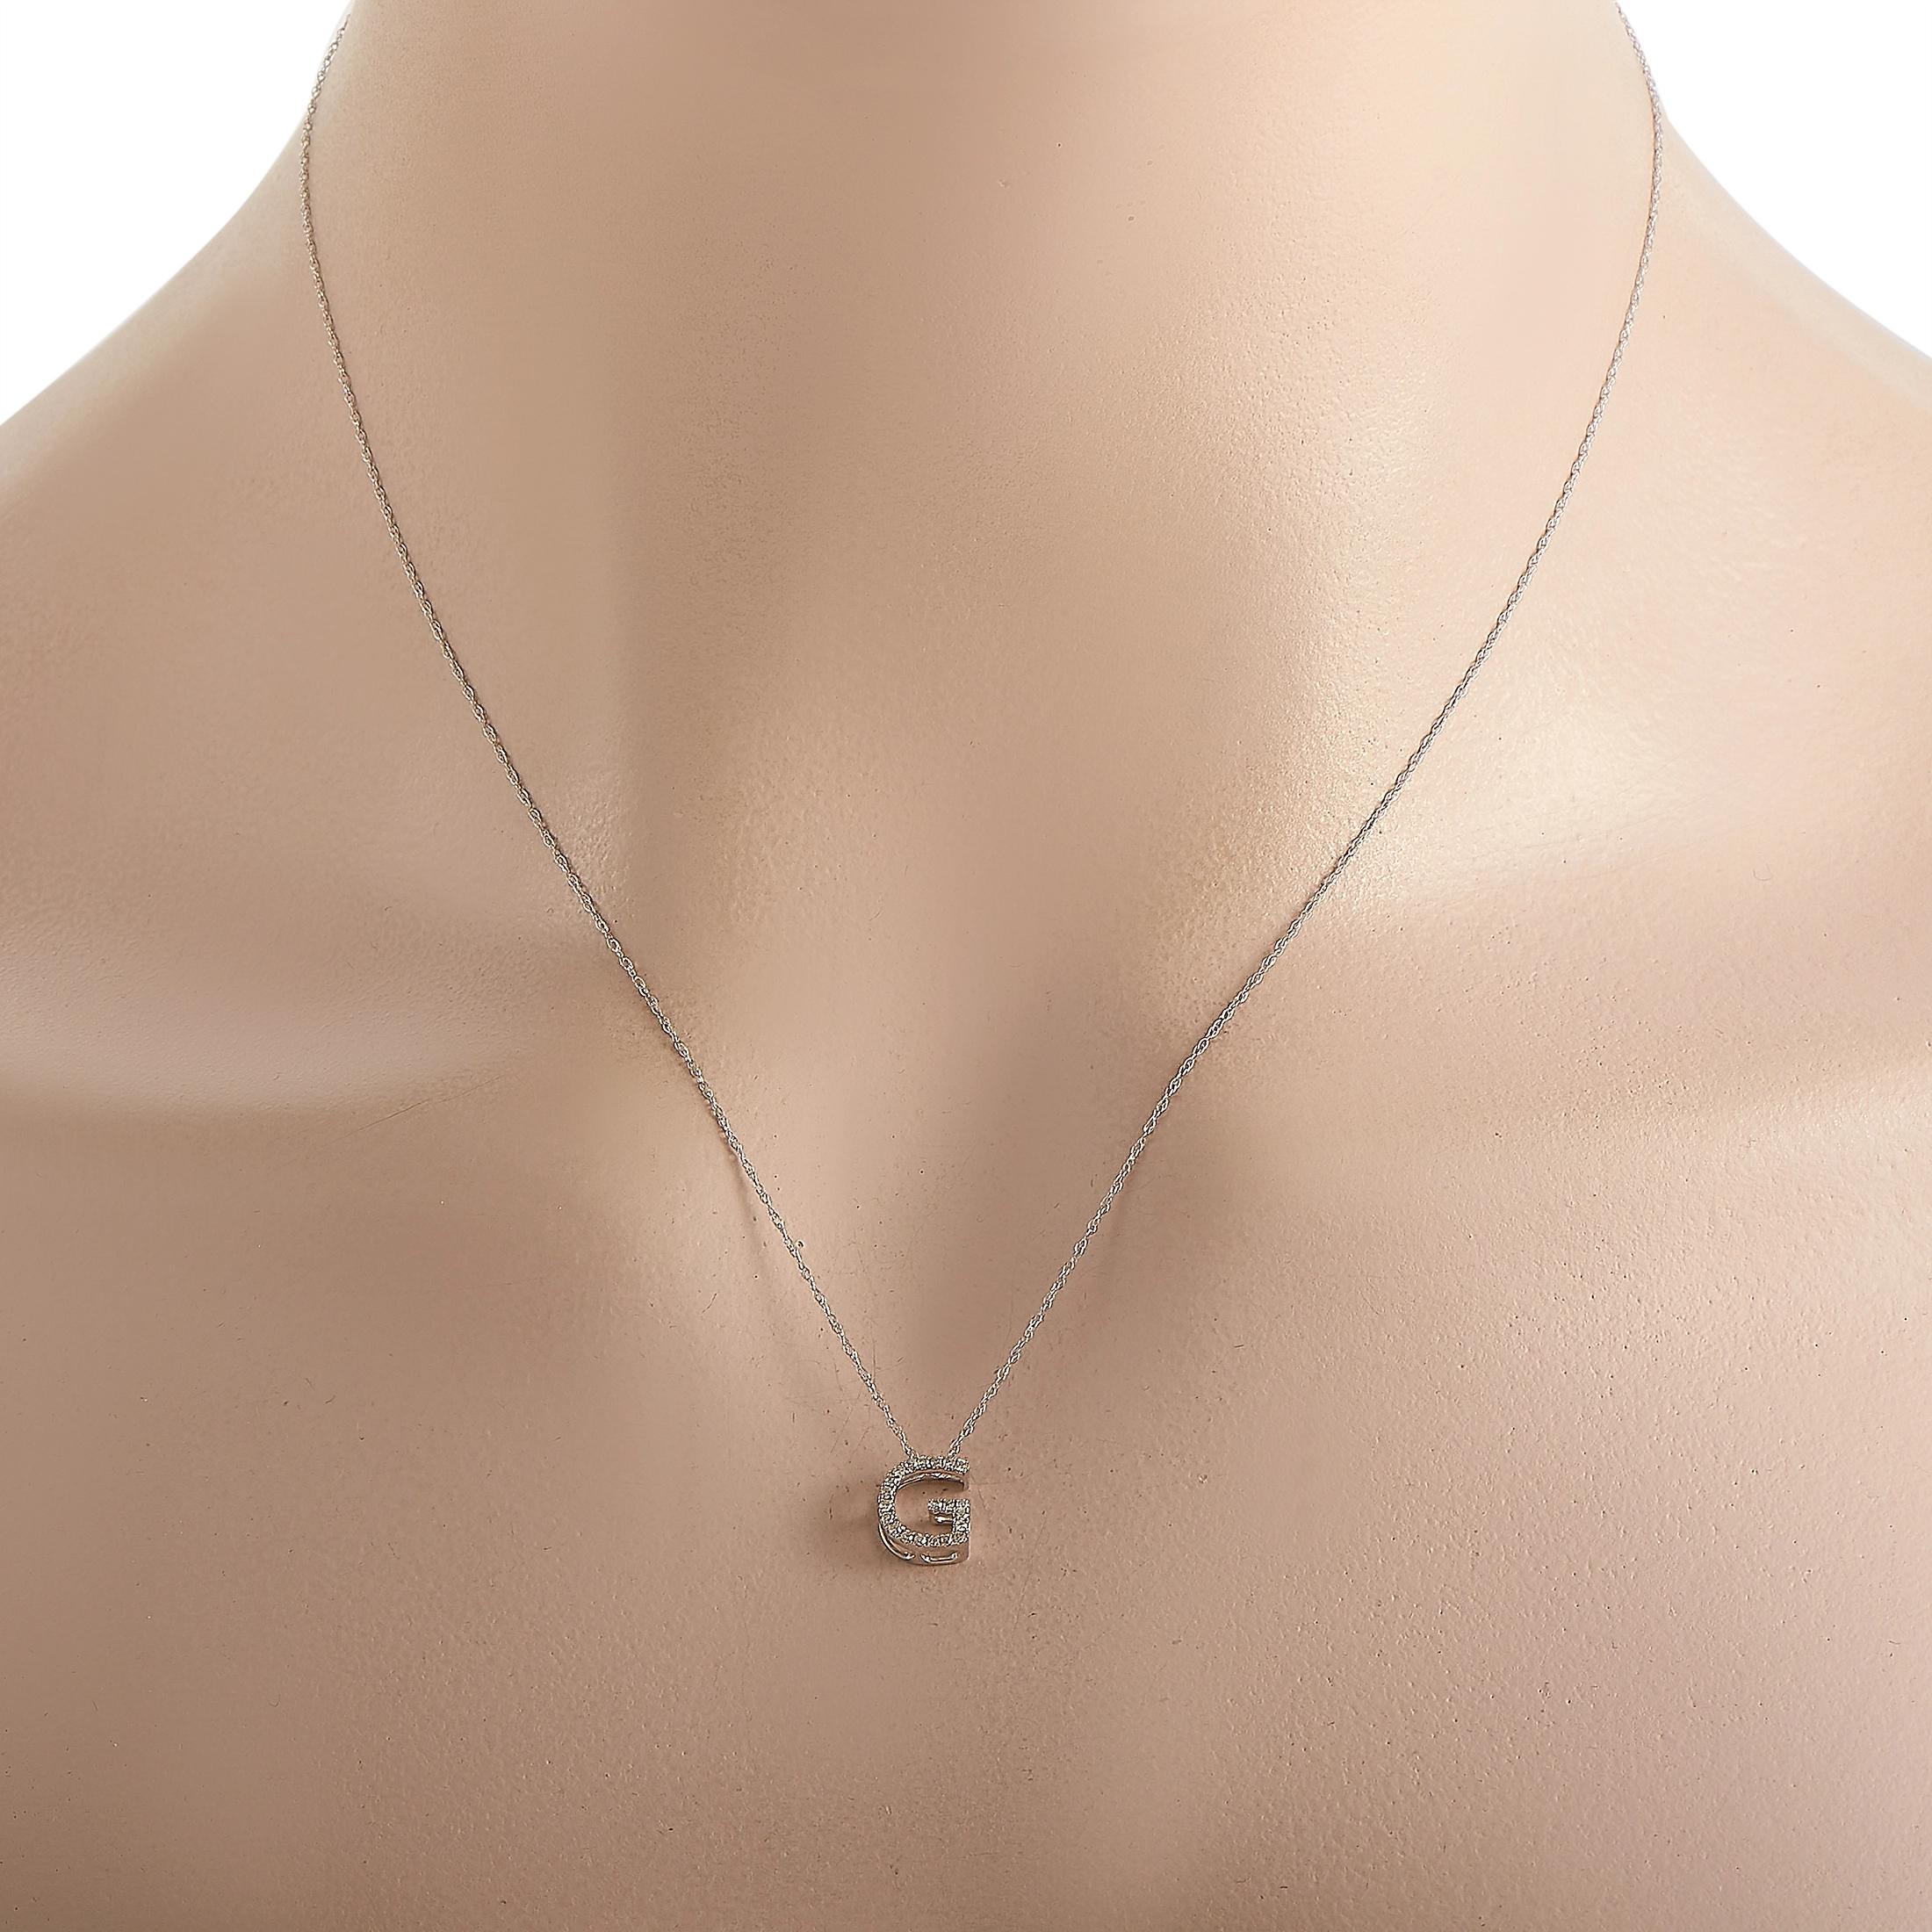 This pretty LB Exclusive 14K White Gold 0.10 ct Diamond Initial ‘G’ Necklace is made with a delicate 14K white gold chain and features a small white gold pendant shaped like the letter ‘G’ and set with 0.10 carats of round diamonds throughout. The